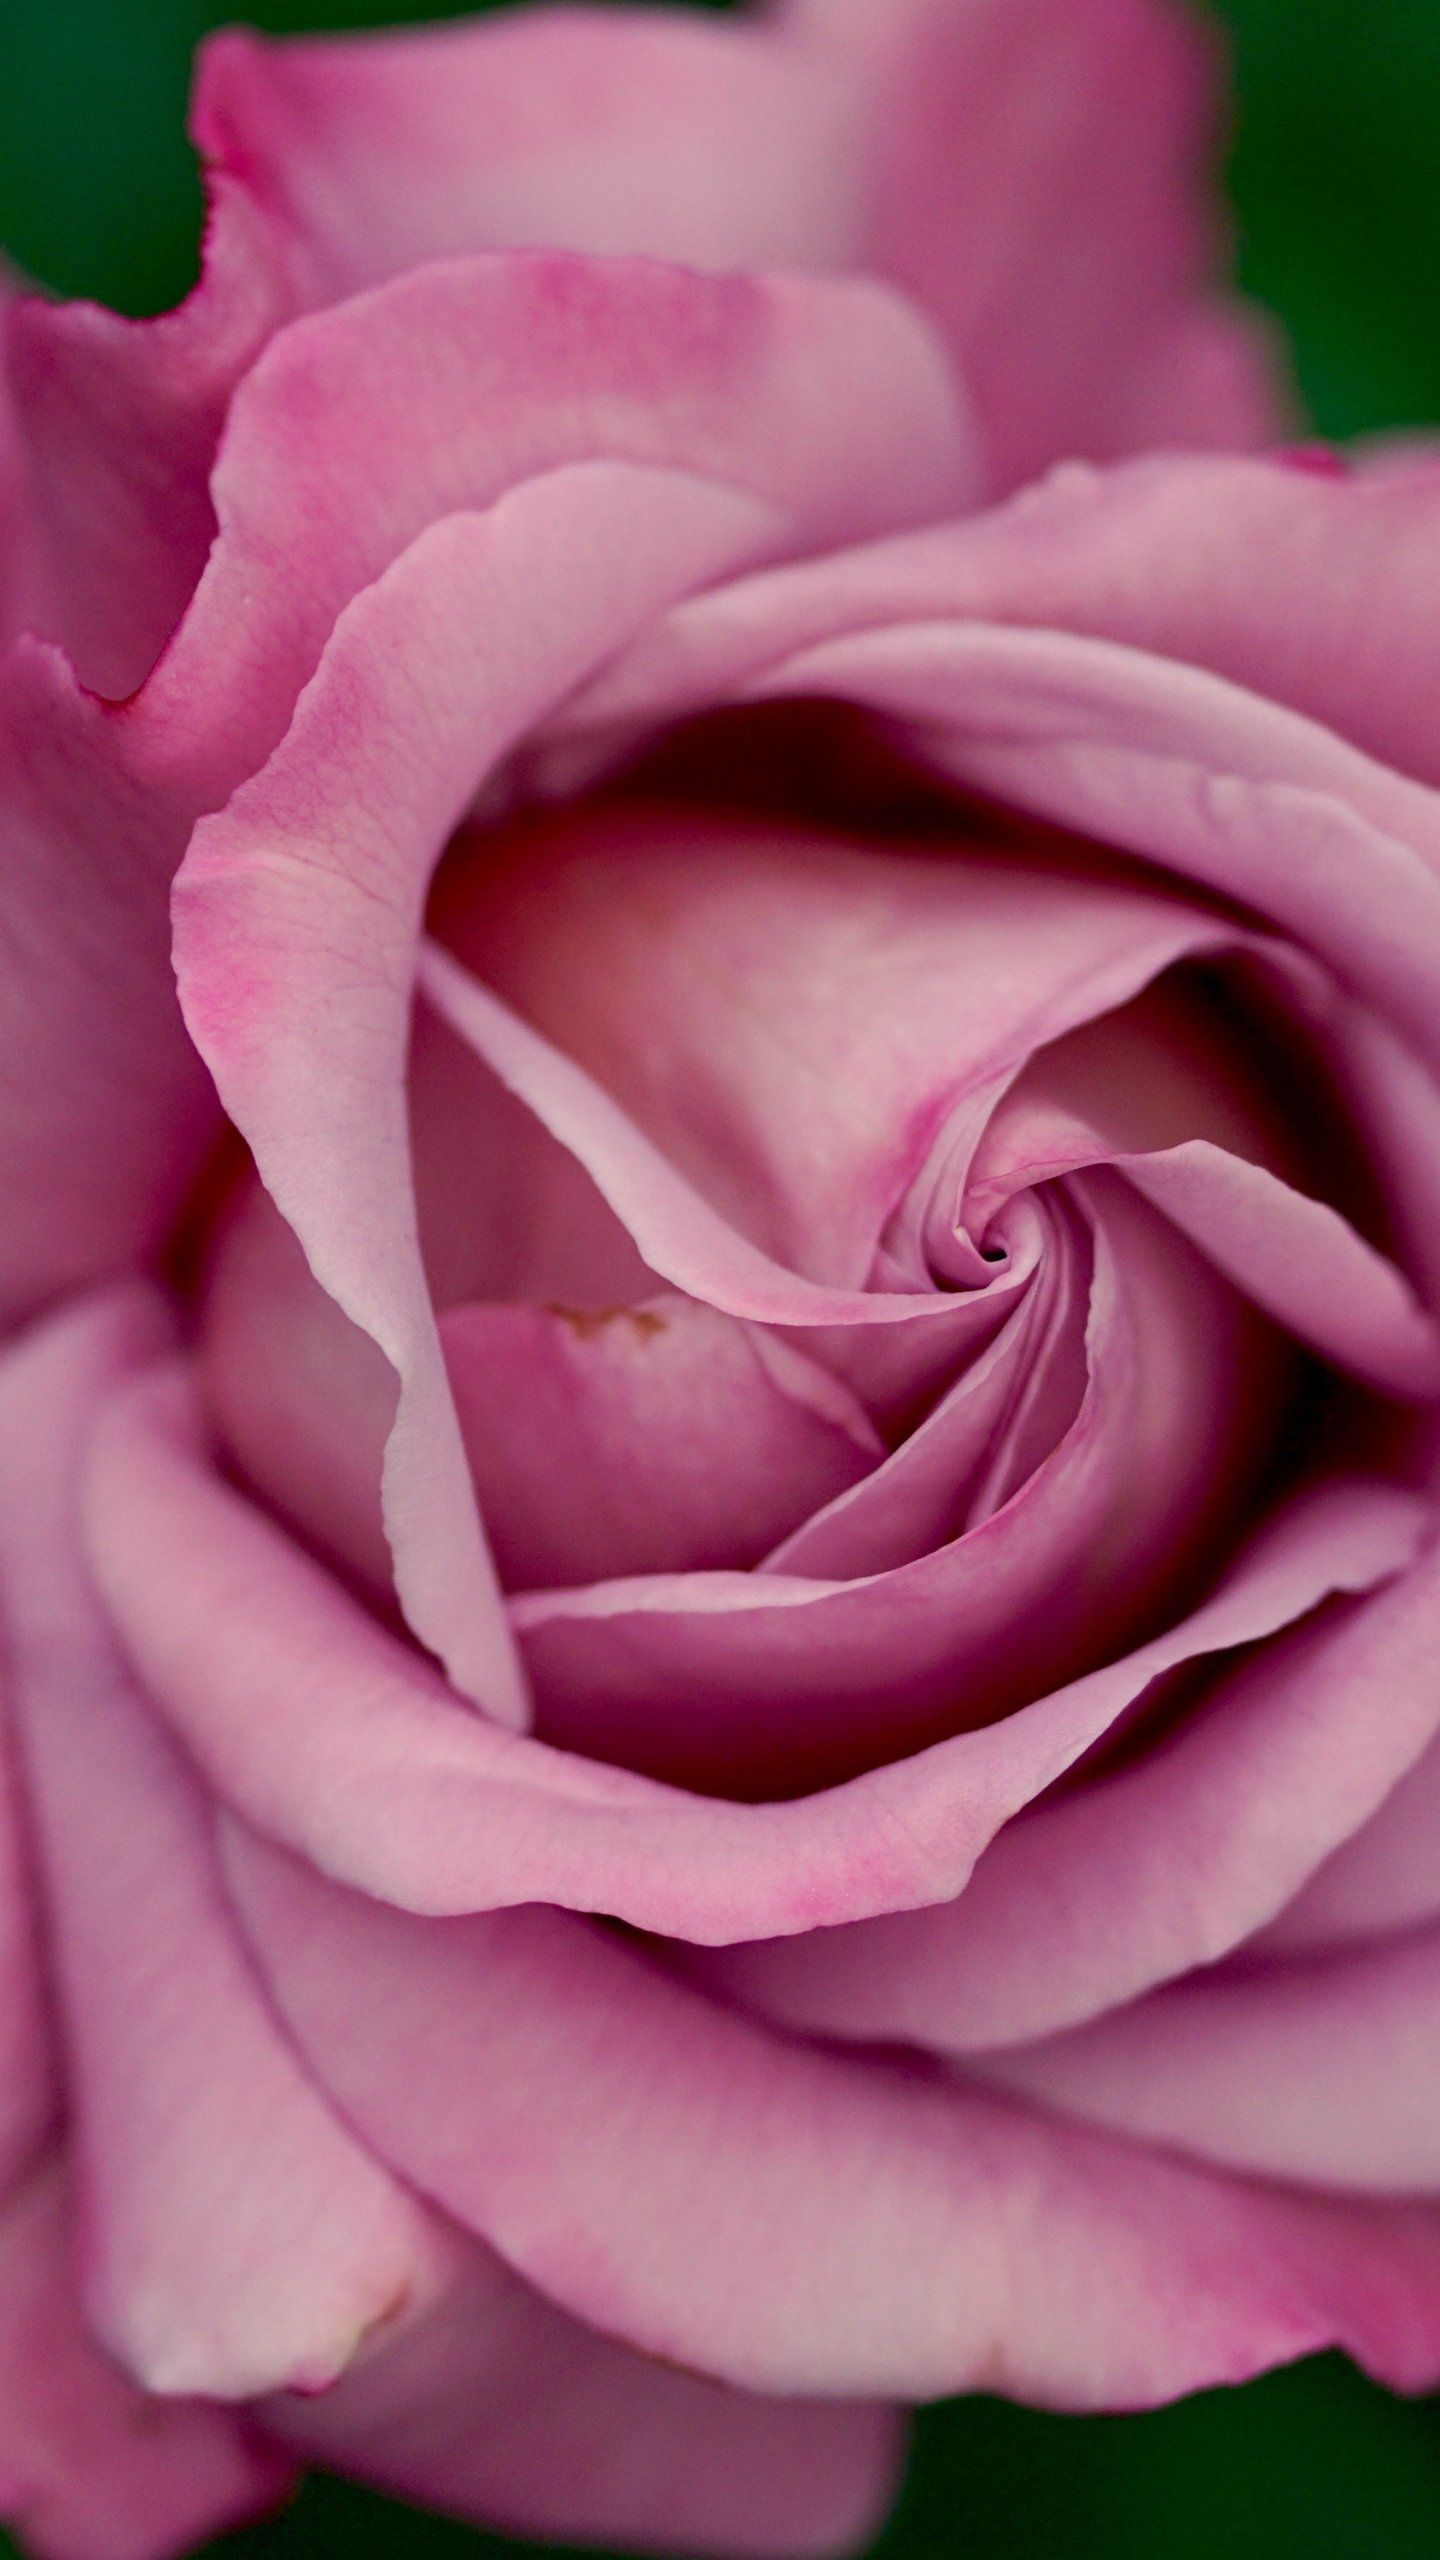 1440x2560 Dusty Pink Rose Wallpaper iPhone, Android \u0026 Desktop Backgrounds | Rose wallpaper, Flower wallpaper, Summer fragrance